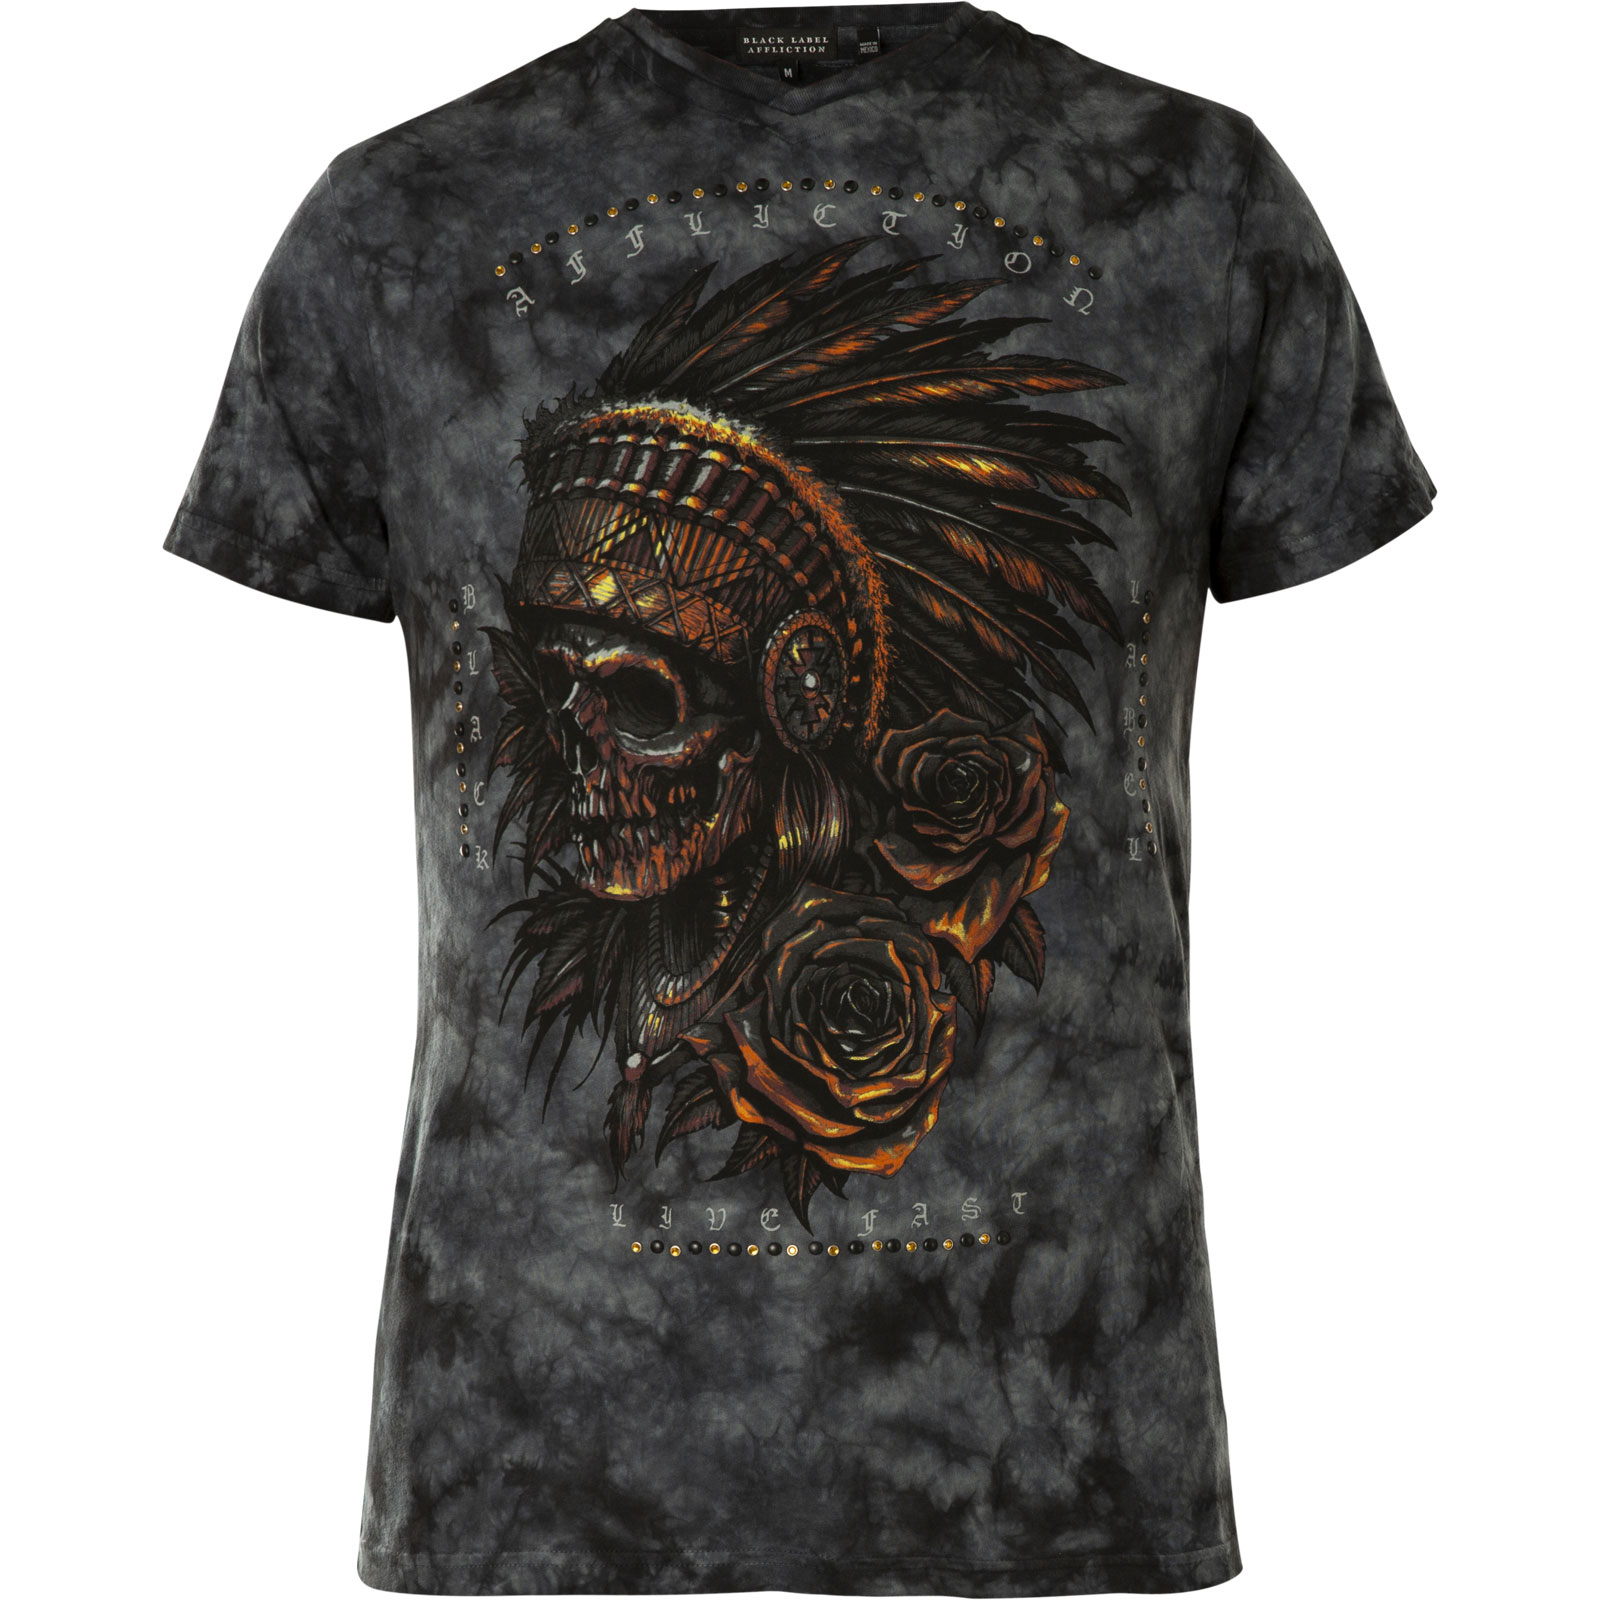 Affliction Forged In Obsidian T-Shirt featuring a indian head and cross